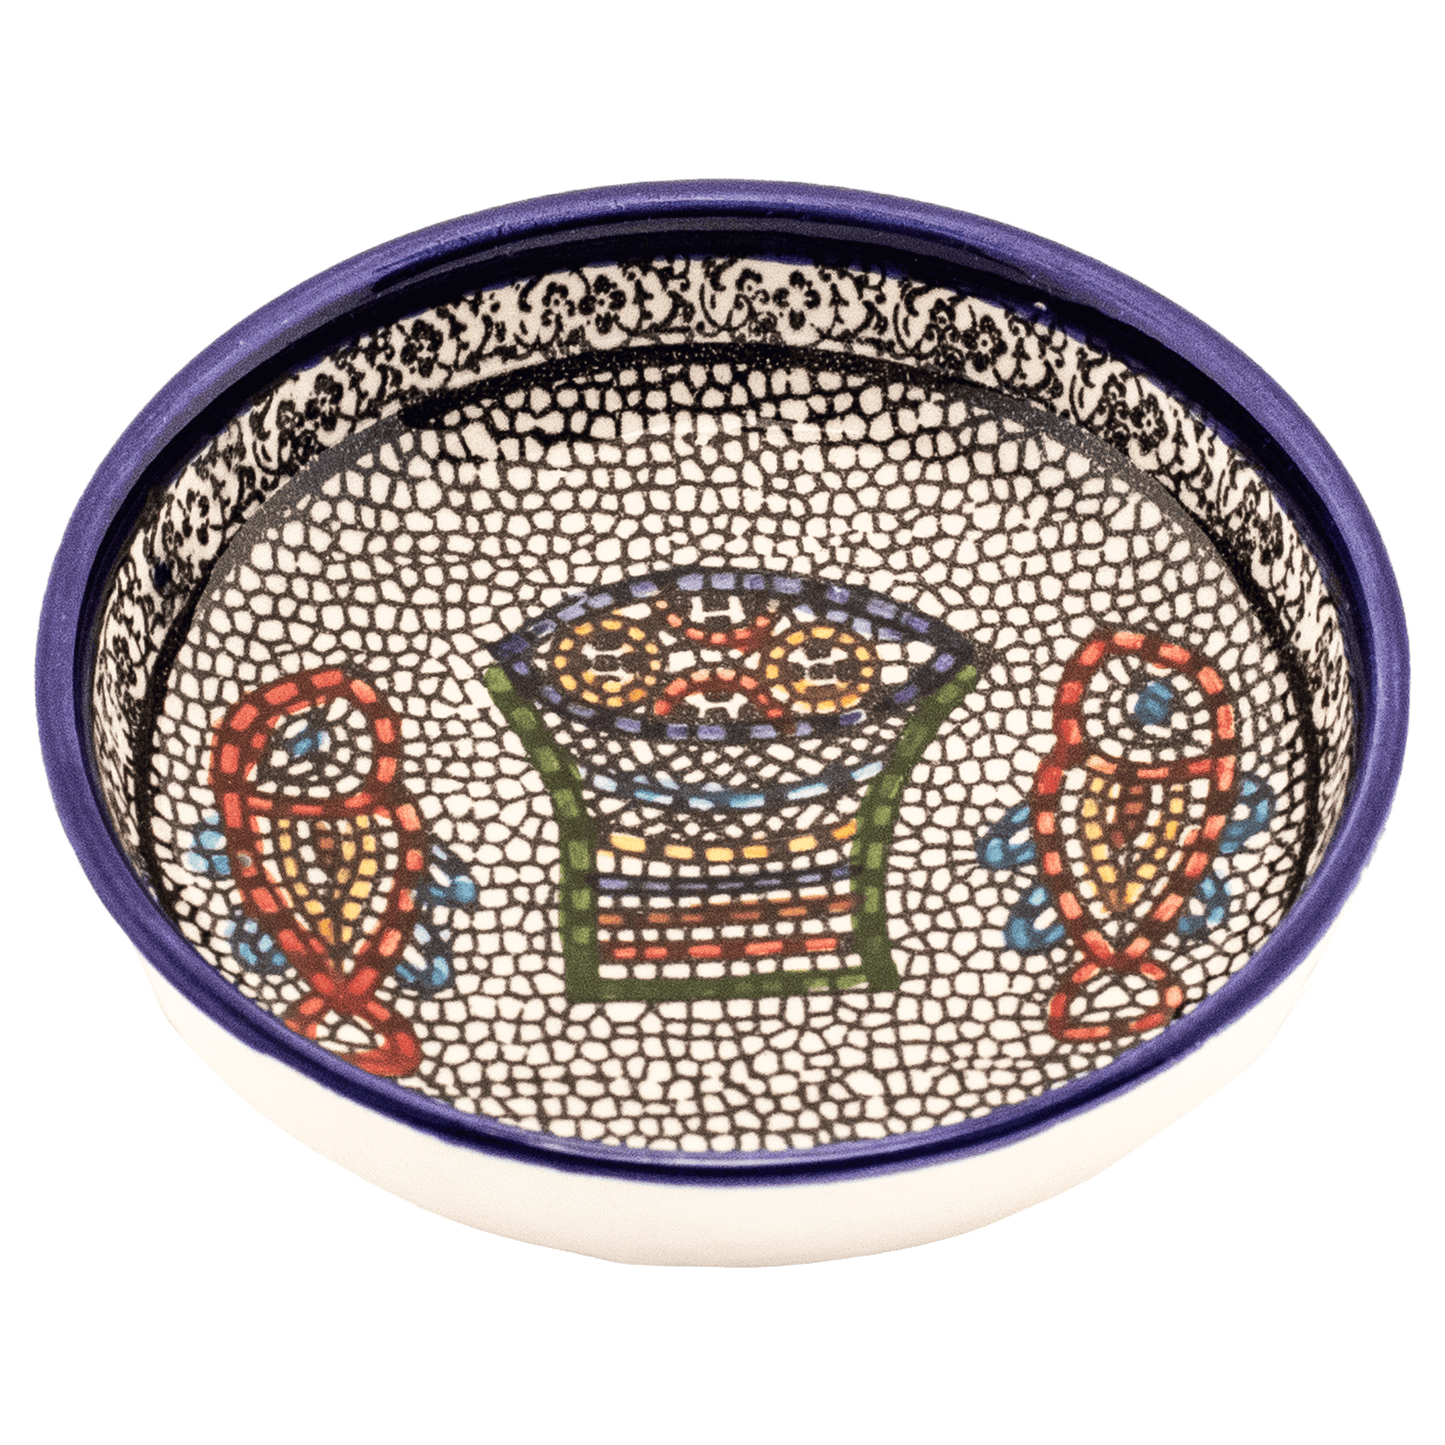 Armenian loves and fish ceramic dipping bowl with lace floral border